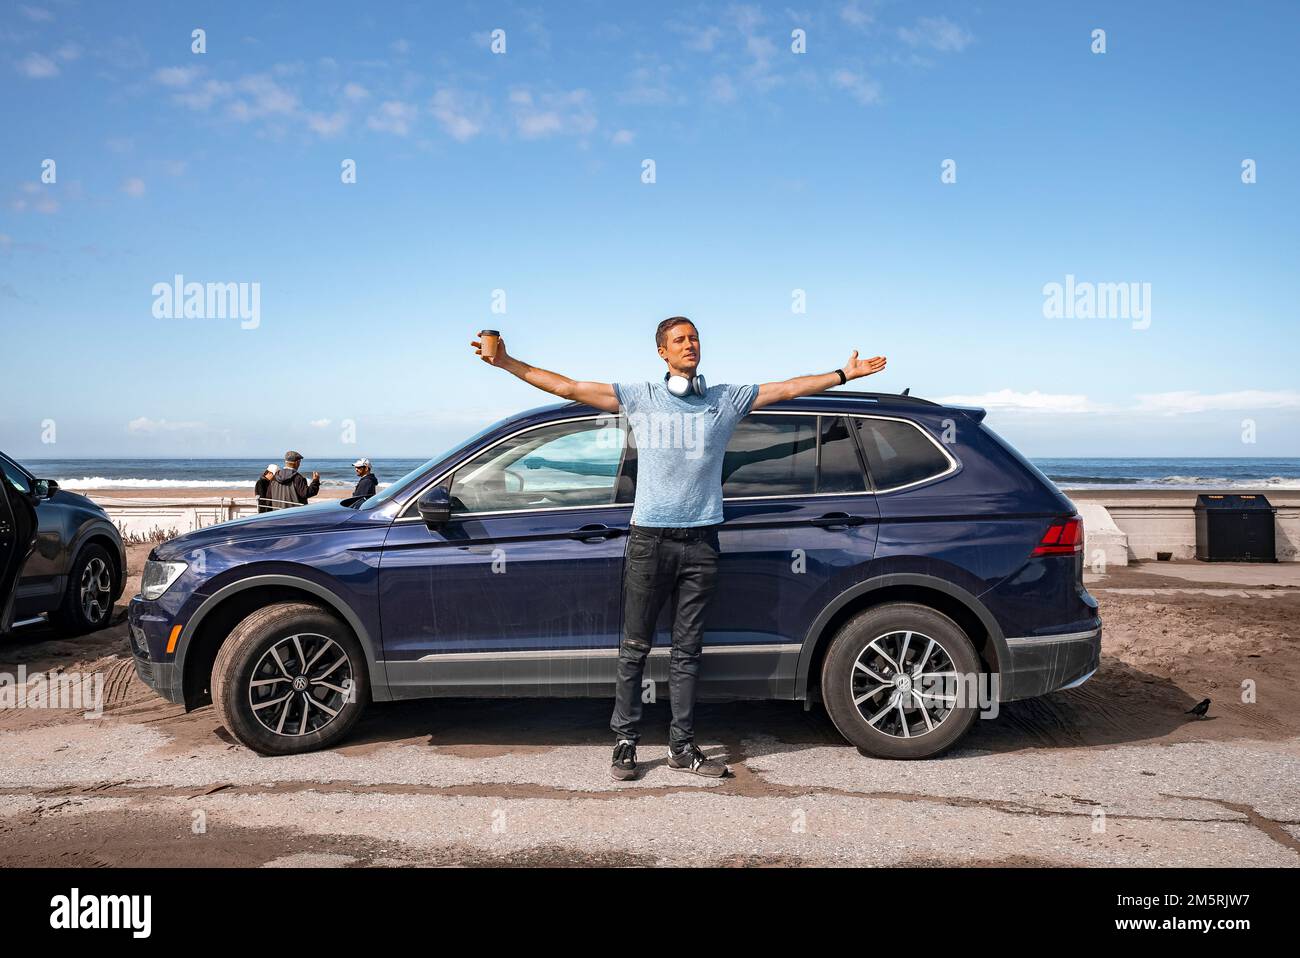 Carefree man with arms outstretched standing by car at beach during summer Stock Photo